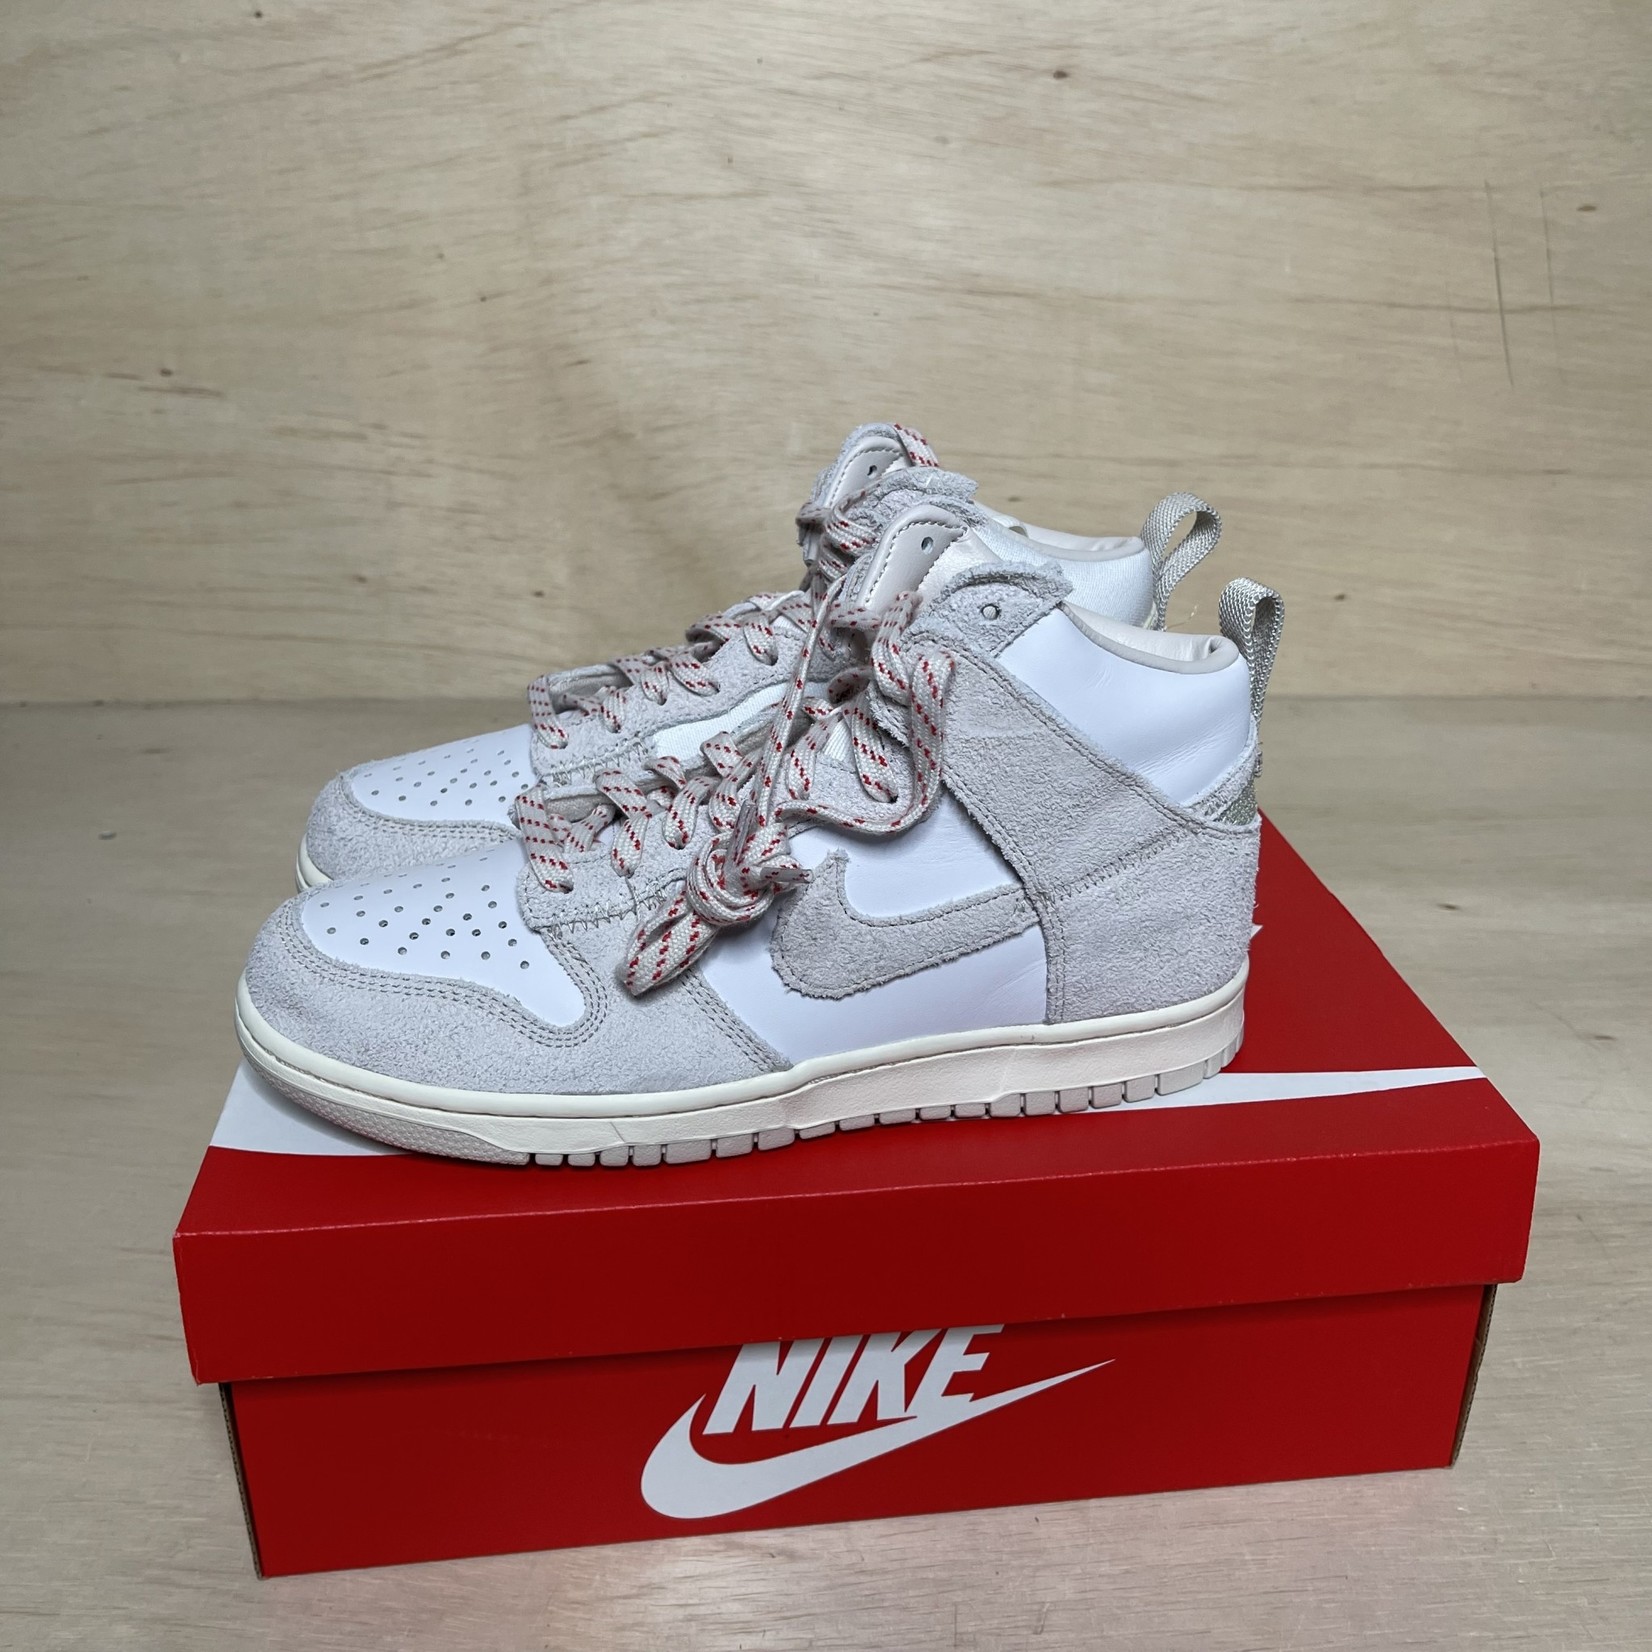 Nike Nike High Dunk Notre Light Orewood brown Size 8, DS BRAND NEW